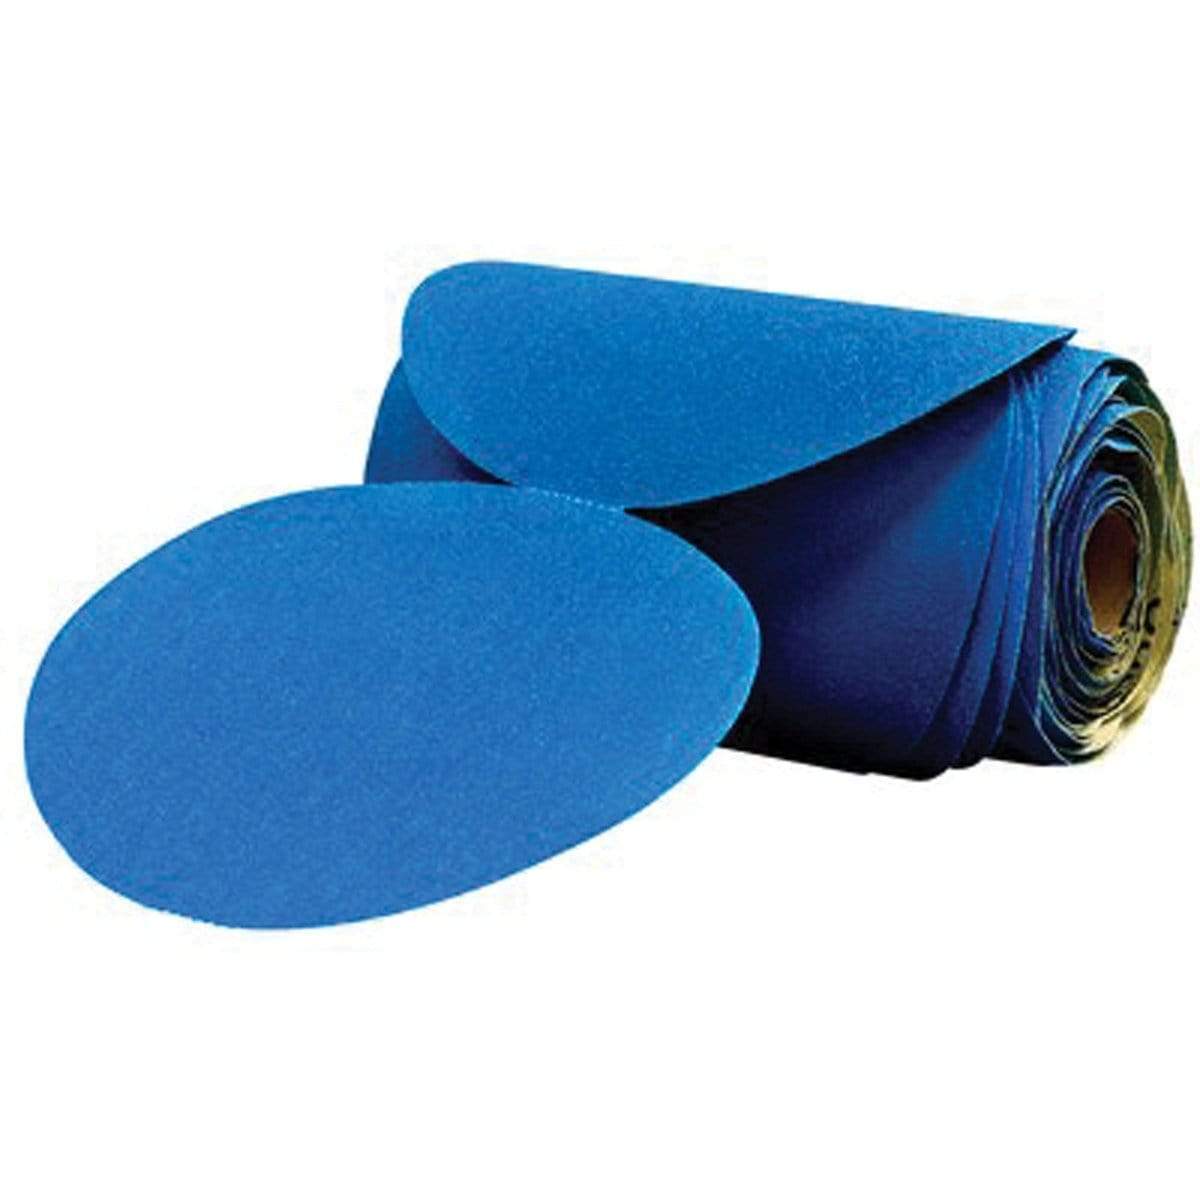 3M Marine Qualifies for Free Shipping 3M Stikit Blue Sandpaper 6" Disc 80 50/Roll #36202